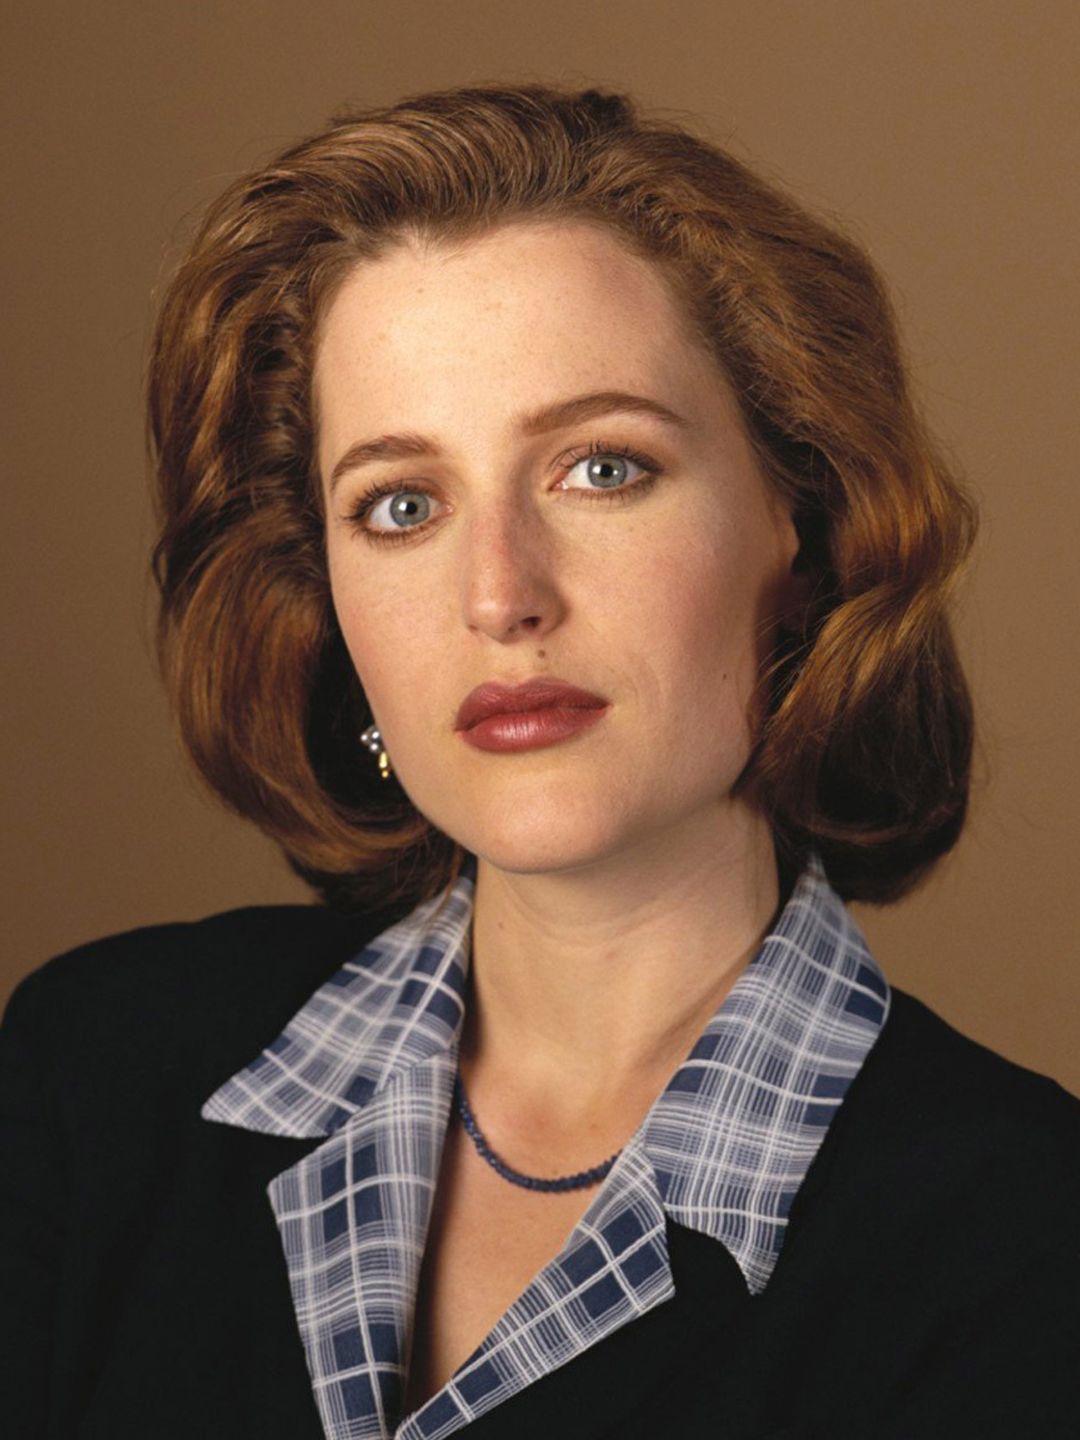 Gillian Anderson place of birth